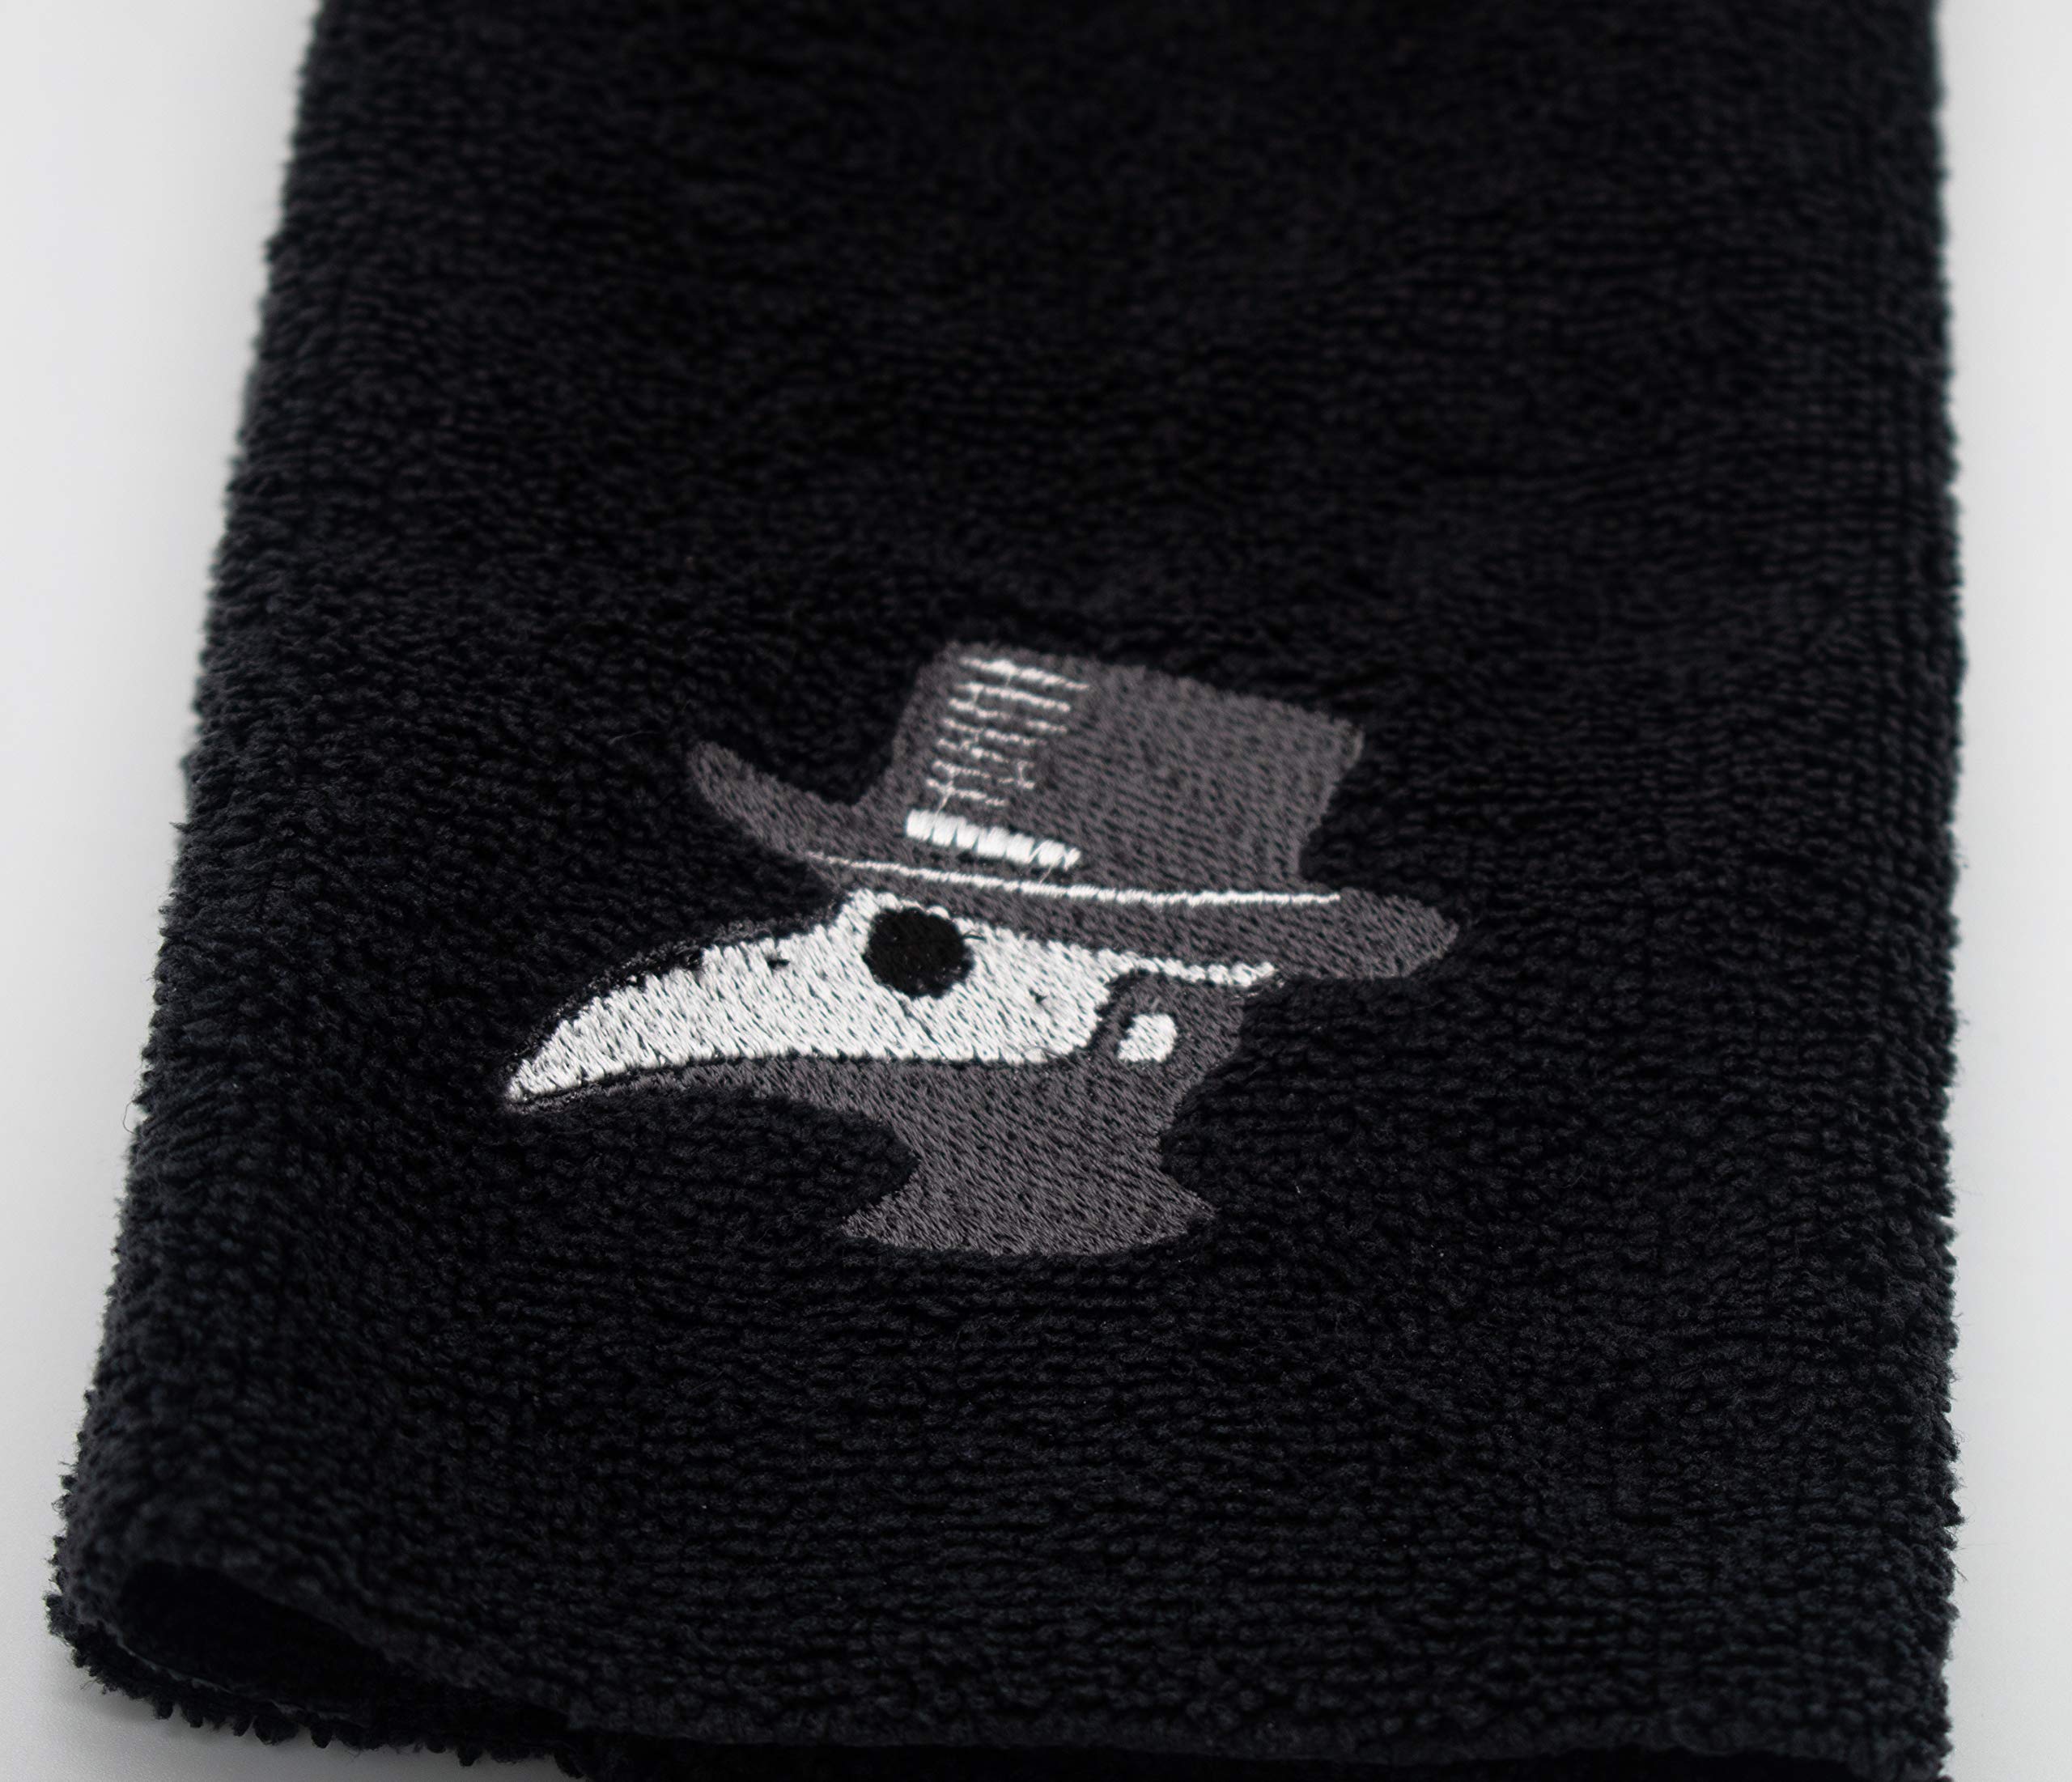 Embroidered Plague Doctor Hand Towel - Plush and Absorbent